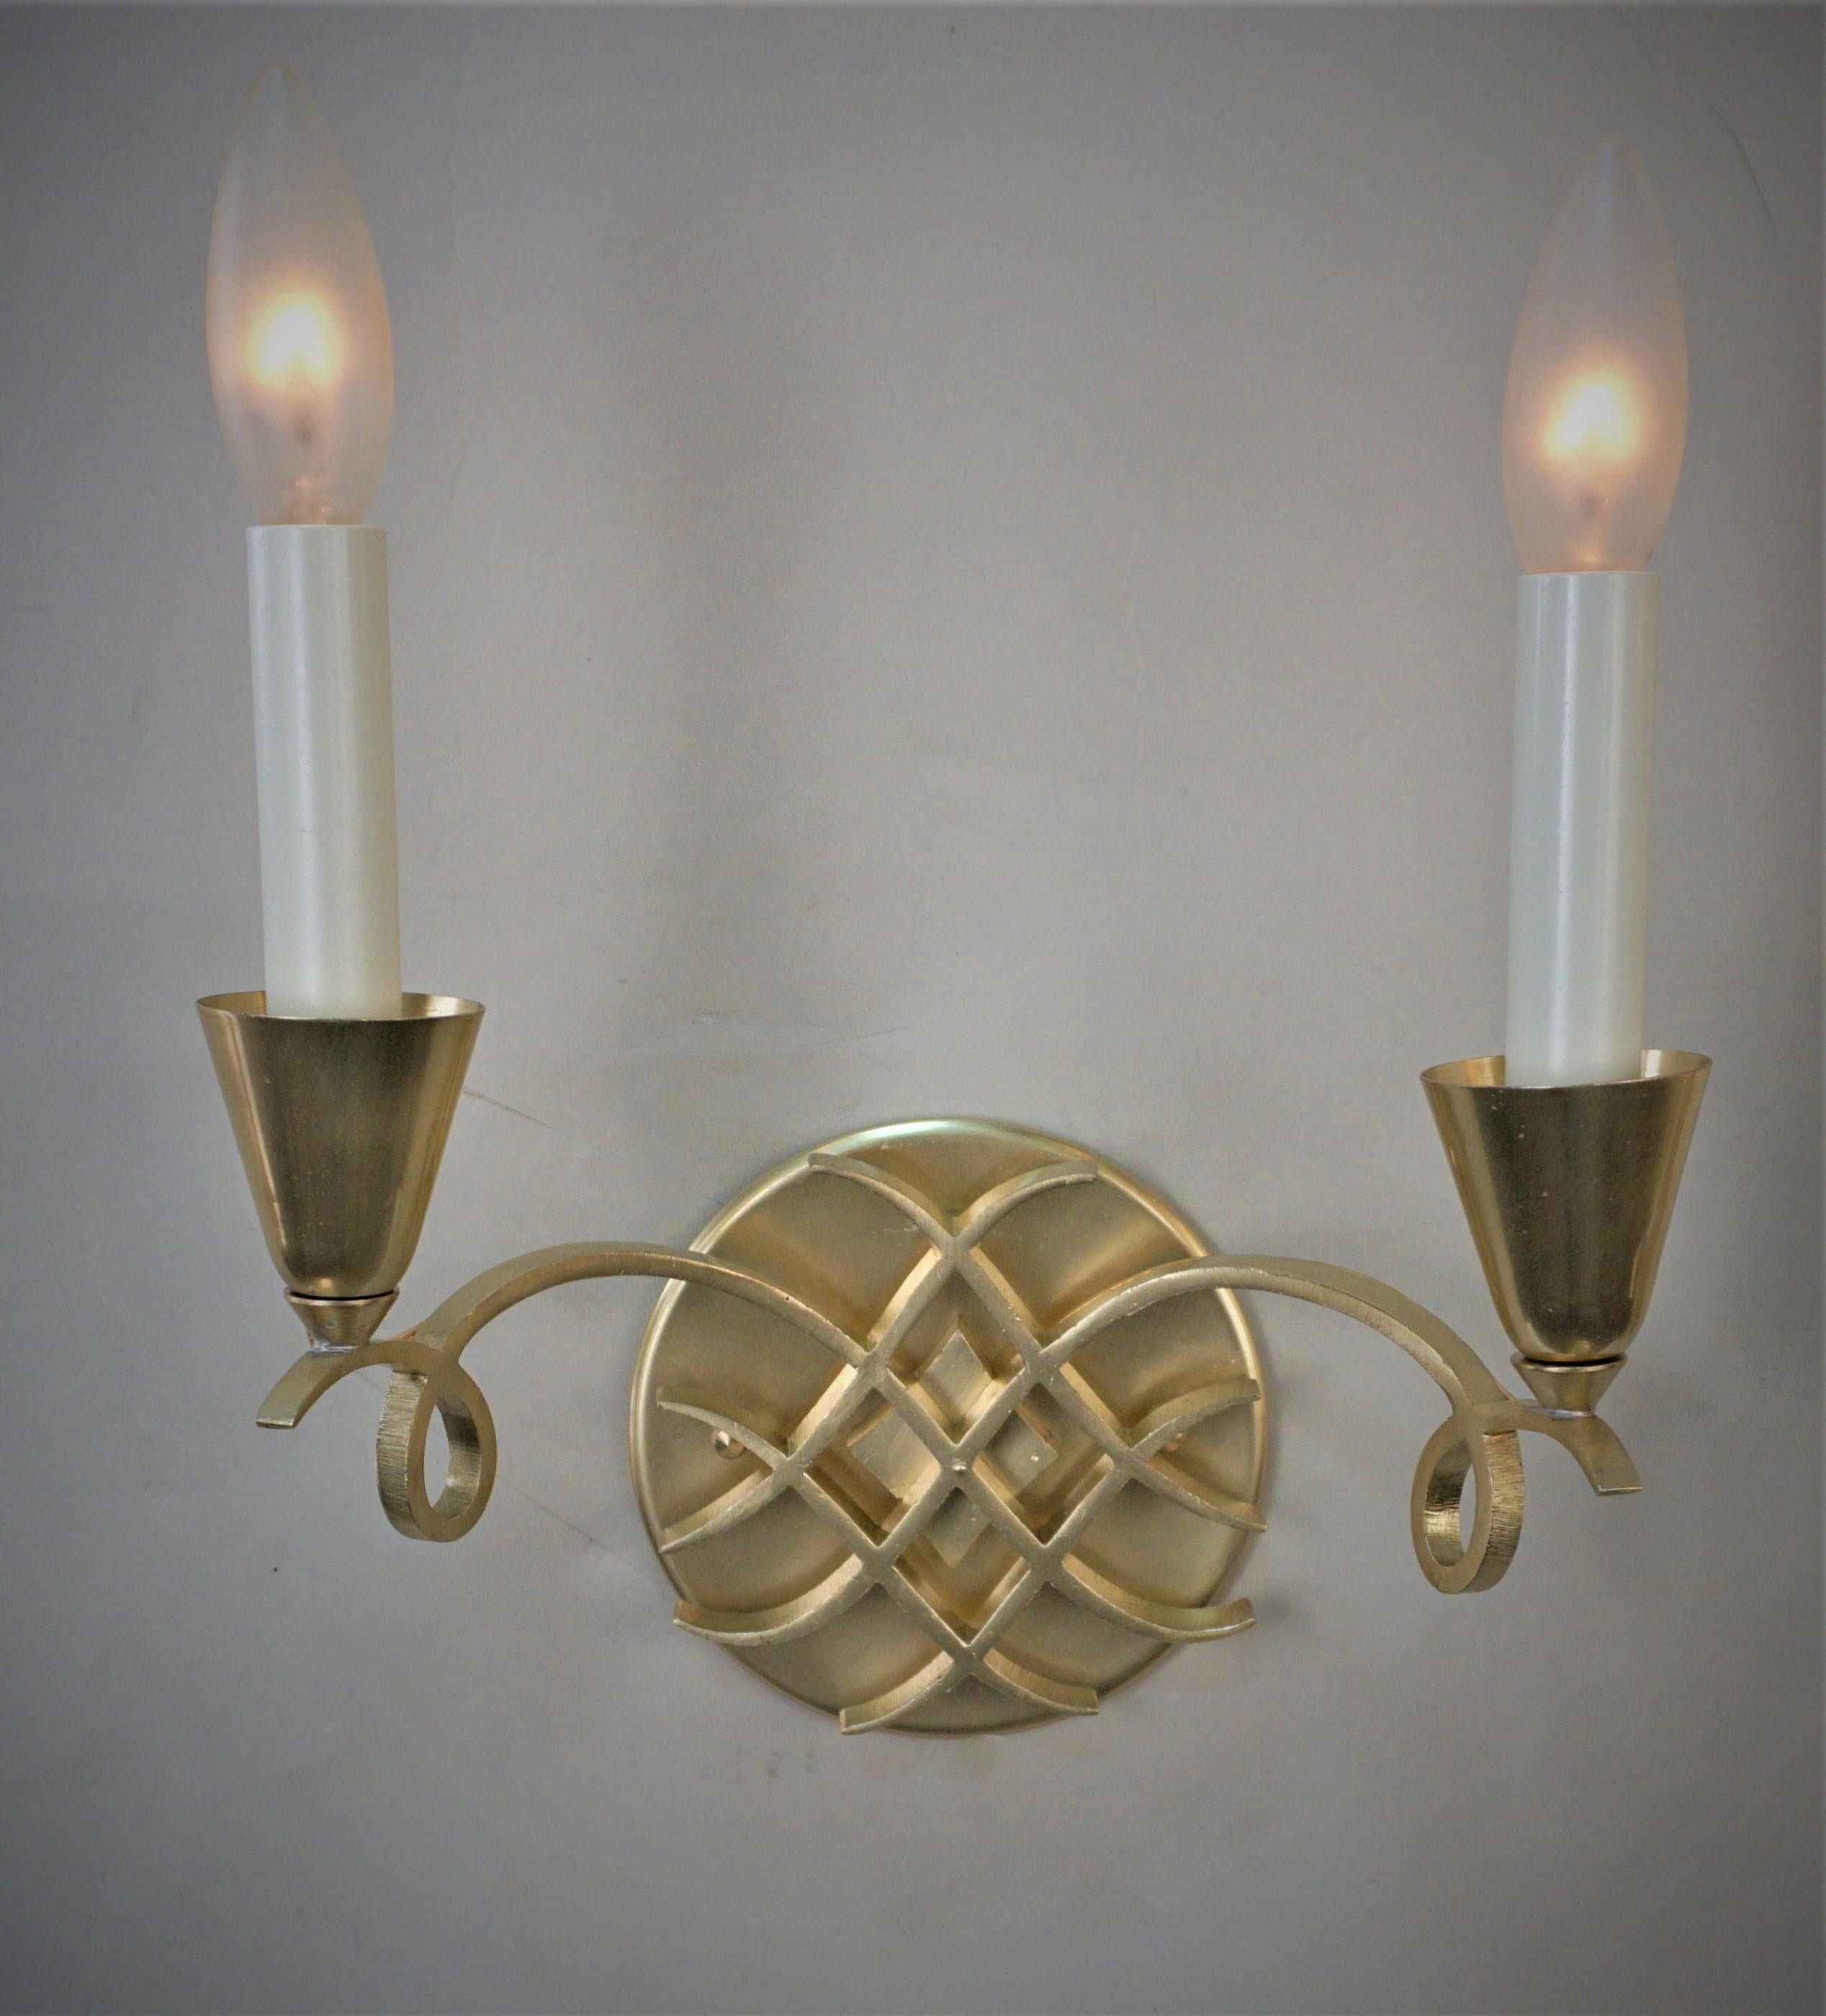 Pair of 1950's double arm satin finish bronze wall sconces.
Professionally rewired and ready for installation.